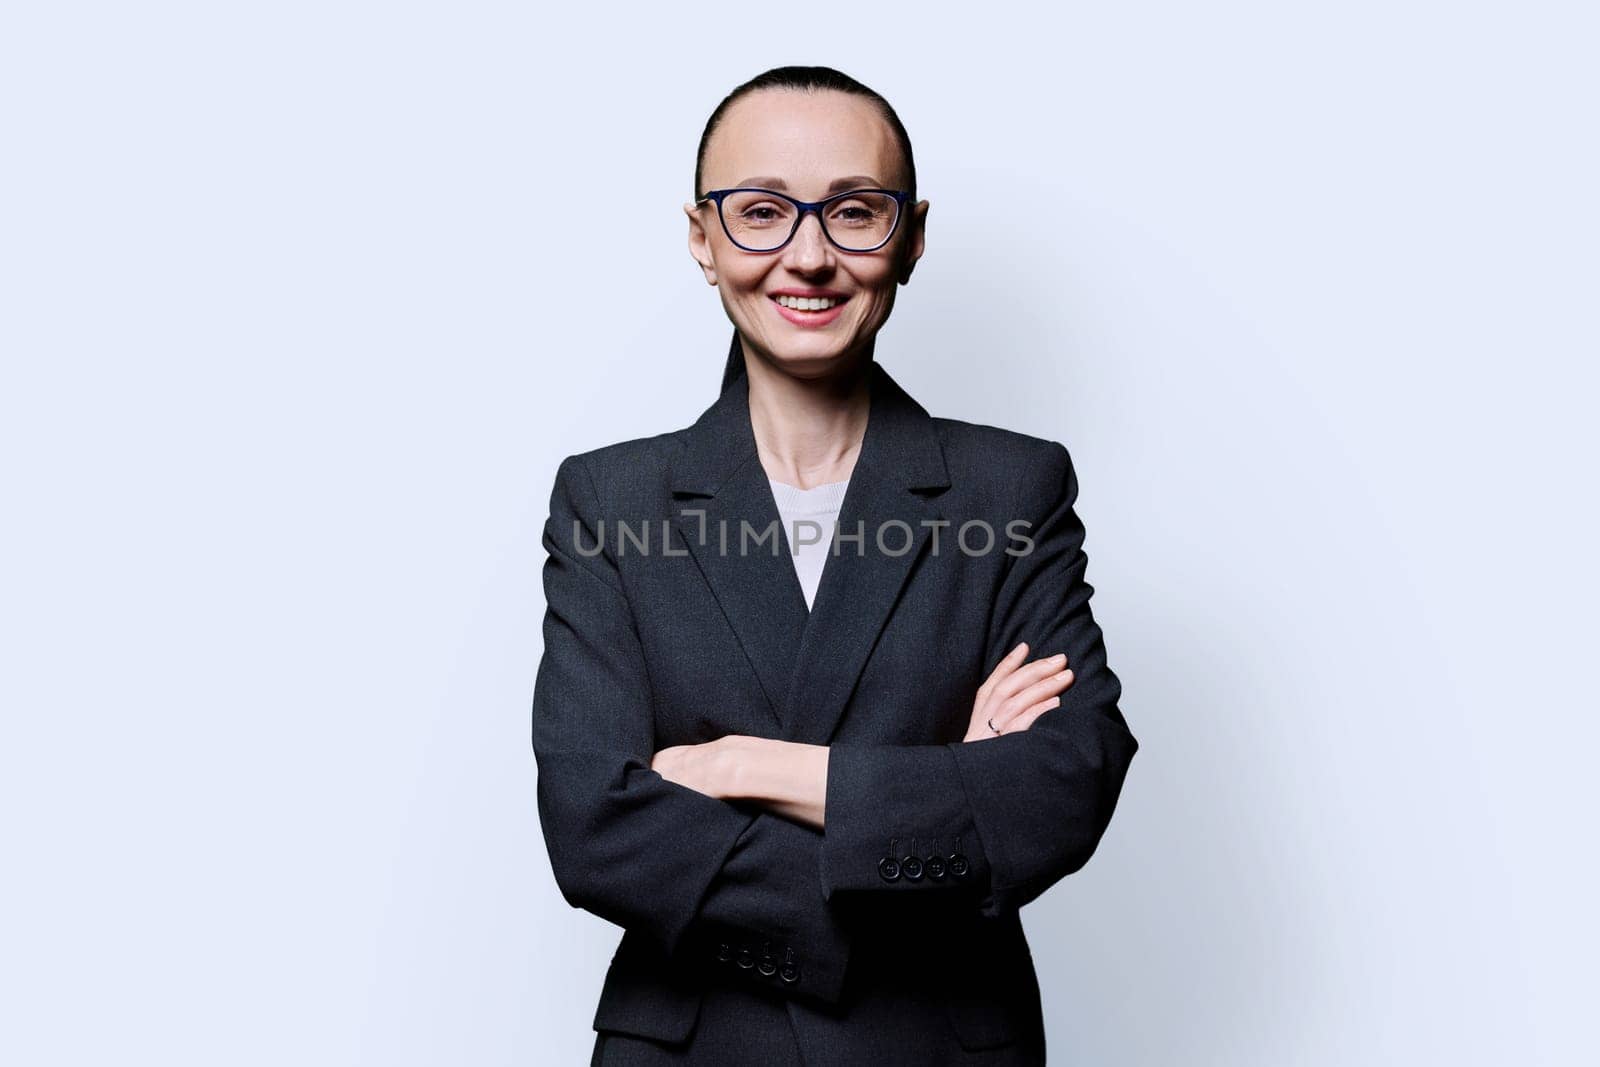 Portrait of happy smiling with teeth business woman in 30s with crossed arms, on white studio background. Confident female in glasses, suit looking at camera. Business work job career people concept